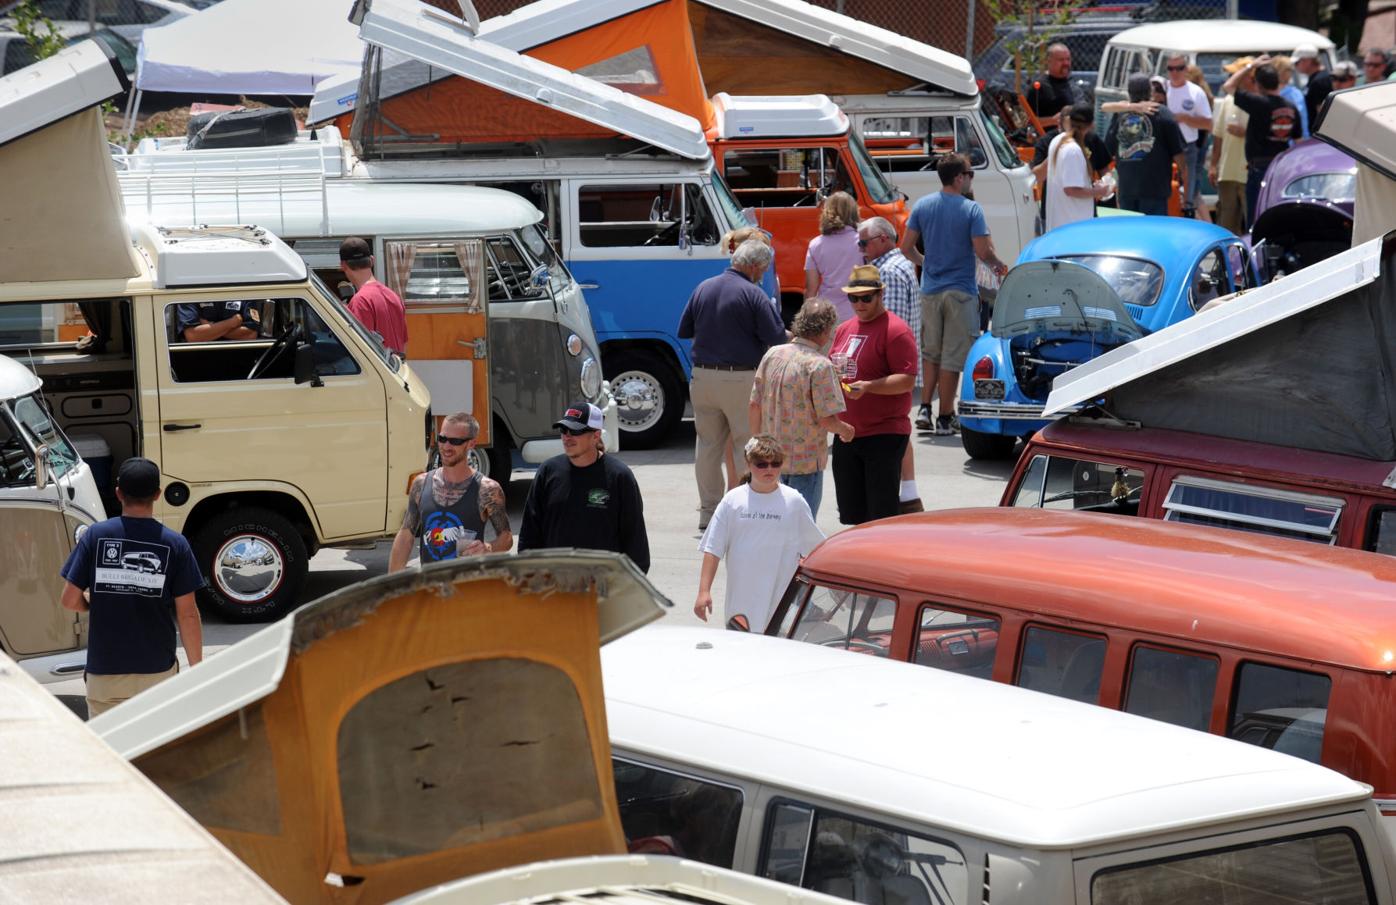 Spectators walk past the rows of VW Buses Saturday, July 27, 2013 during the Buses at the Brewery event outside Bristol Brewery and Ivywild School in Colorado Springs. More than 50 Volkswagon were on display at the annual event sponored by the Syndicate...